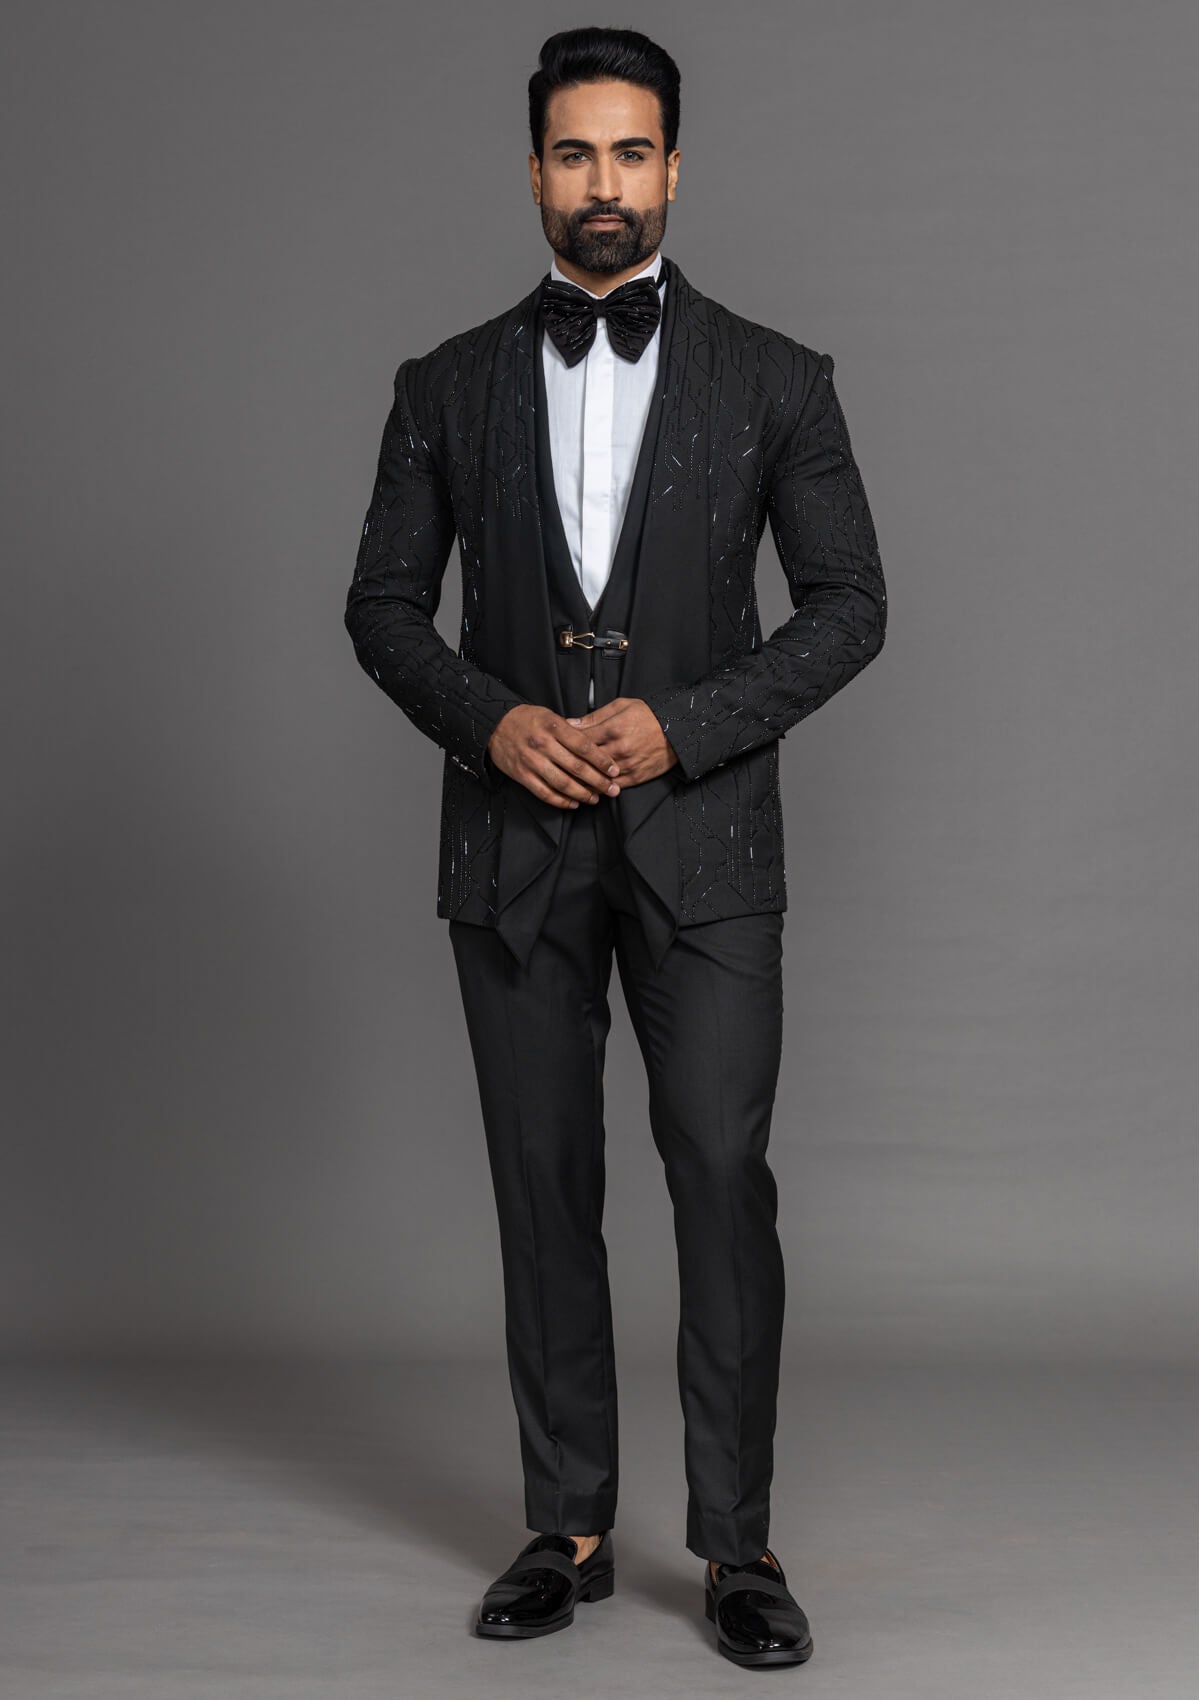 Classic black two-piece suit for a formal occasion